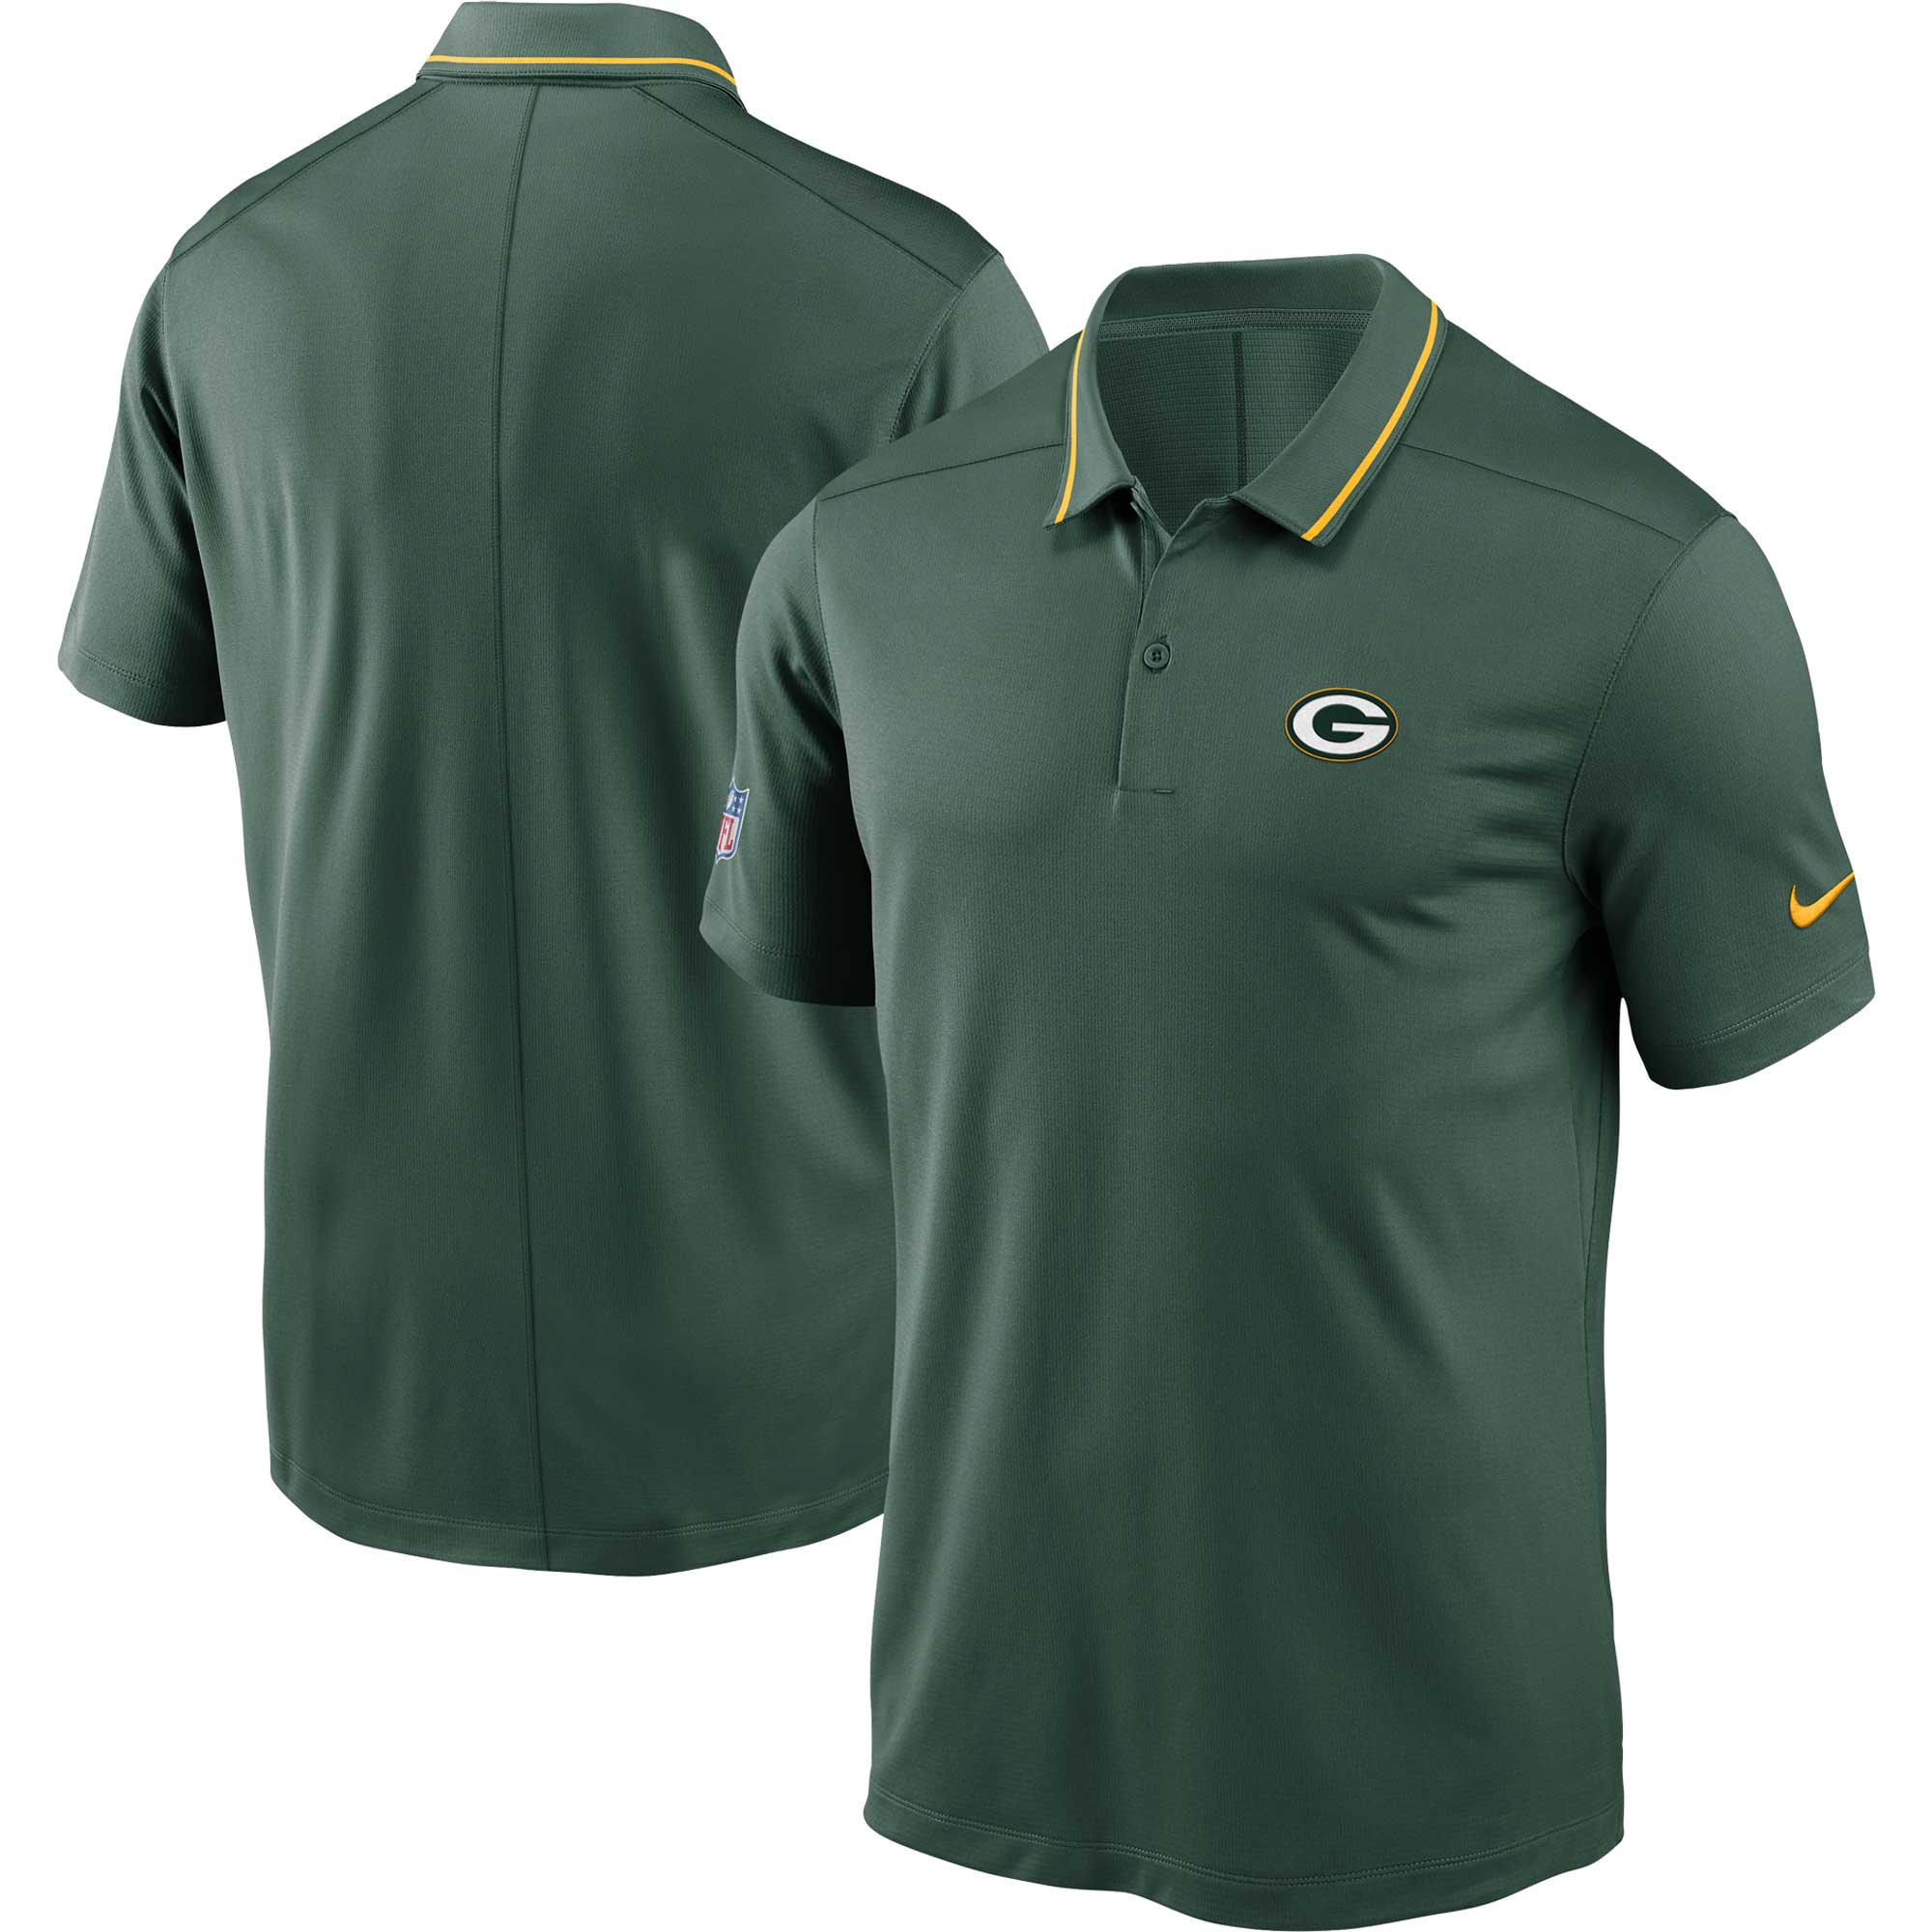 Nike Packers Sideline Victory Polo - Men's